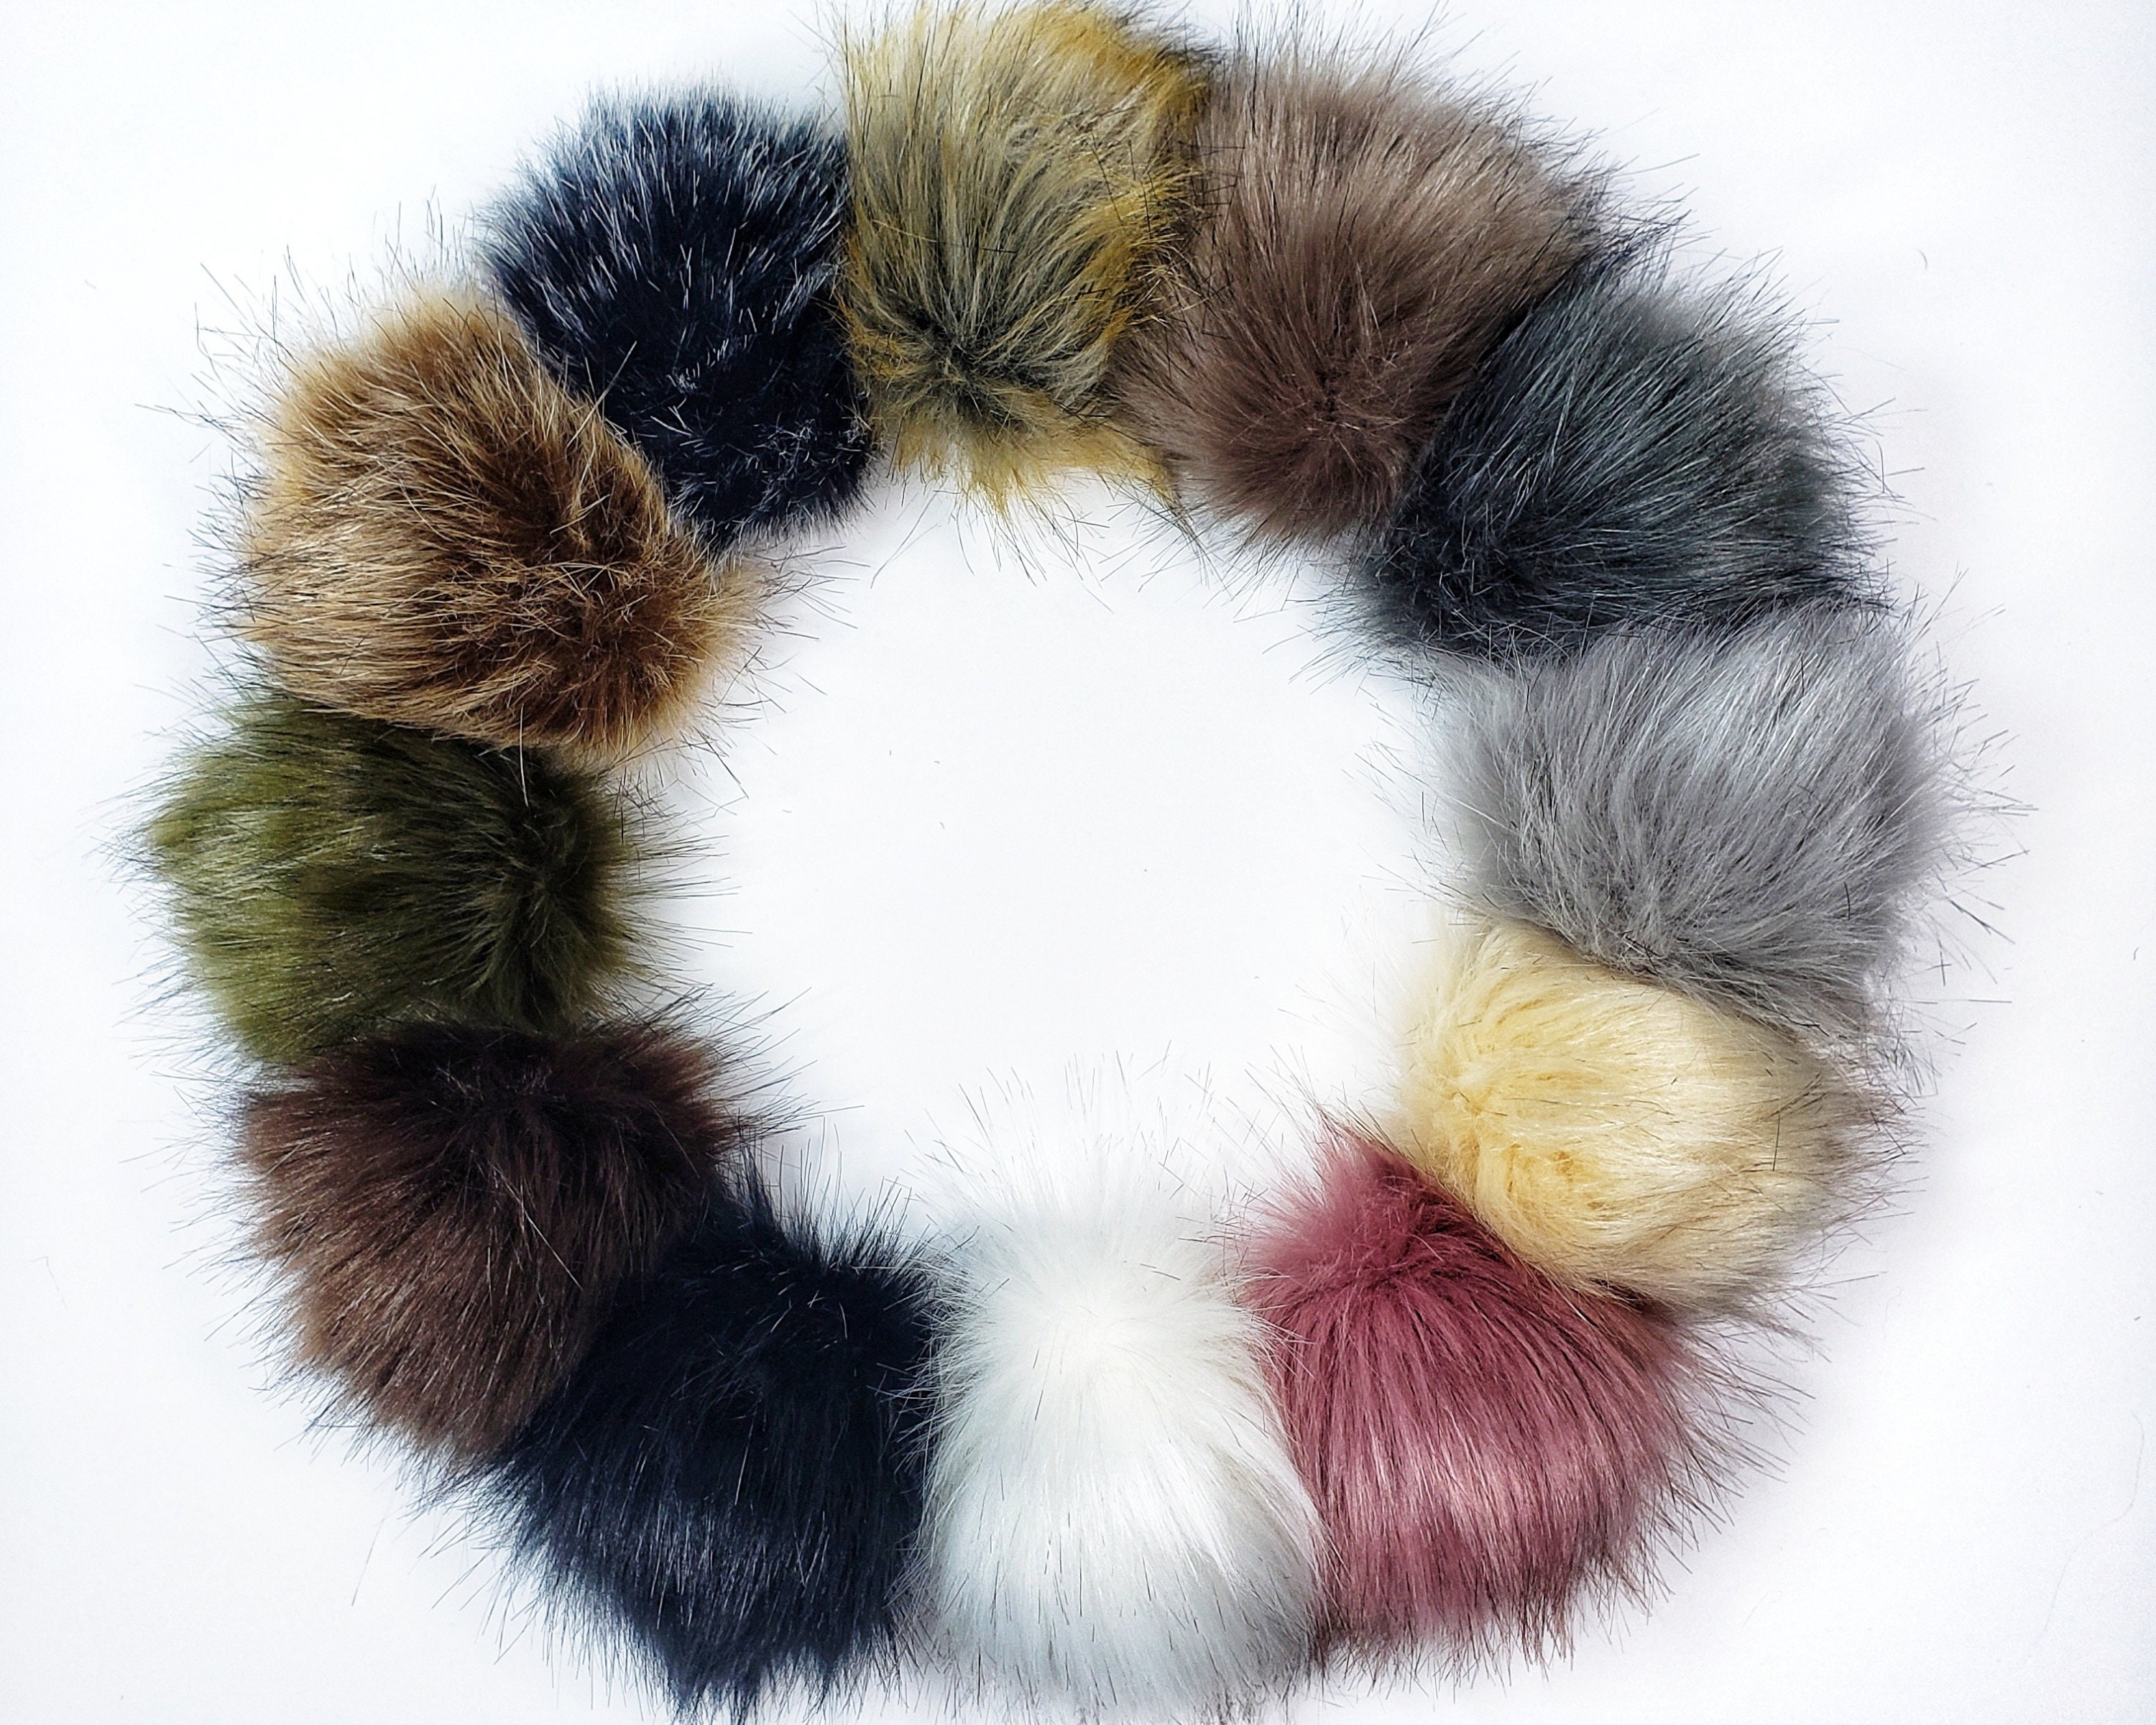 Fluffy Pom Poms Puff Balls Pompoms for Keychains - Faux Fur Pom Poms for  Hats Scarves Shoes Bags Charms 20 PCs 10 Colors 3 Inches